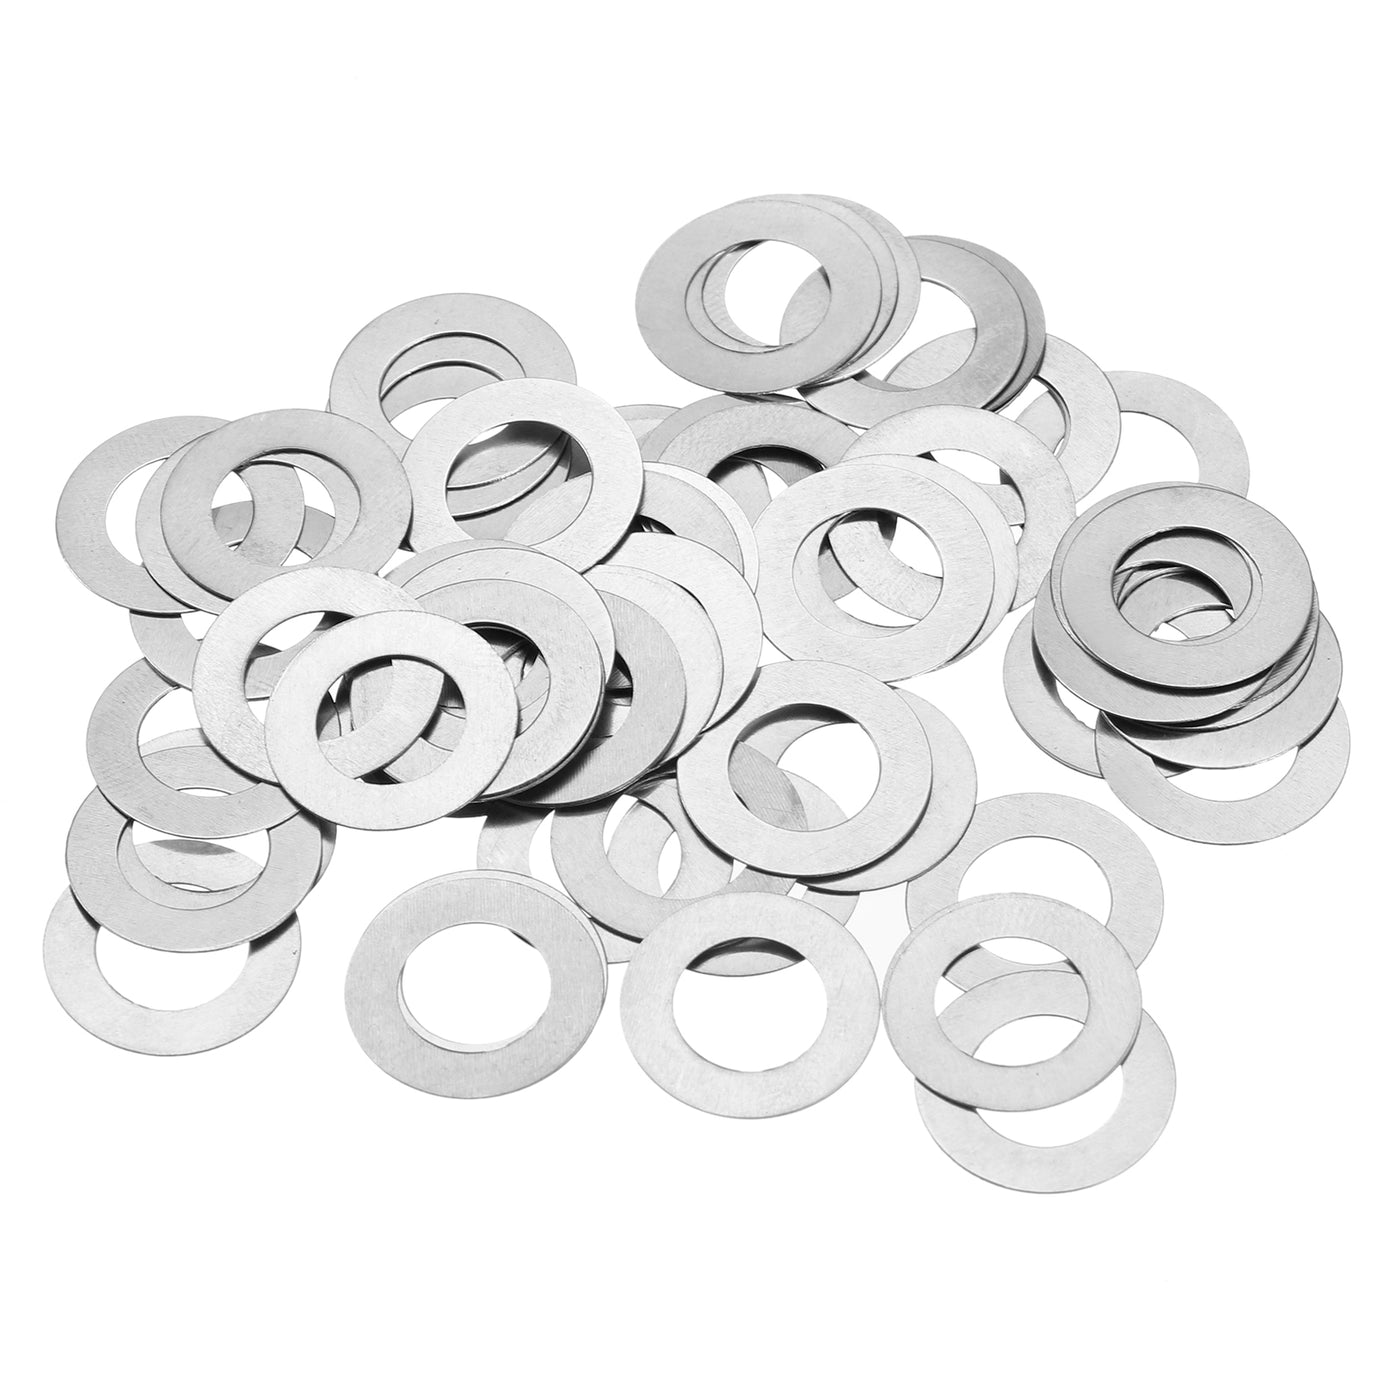 uxcell Uxcell M8 304 Stainless Steel Flat Washers, 50pcs 8x14x0.3mm Ultra Thin Flat Spacers